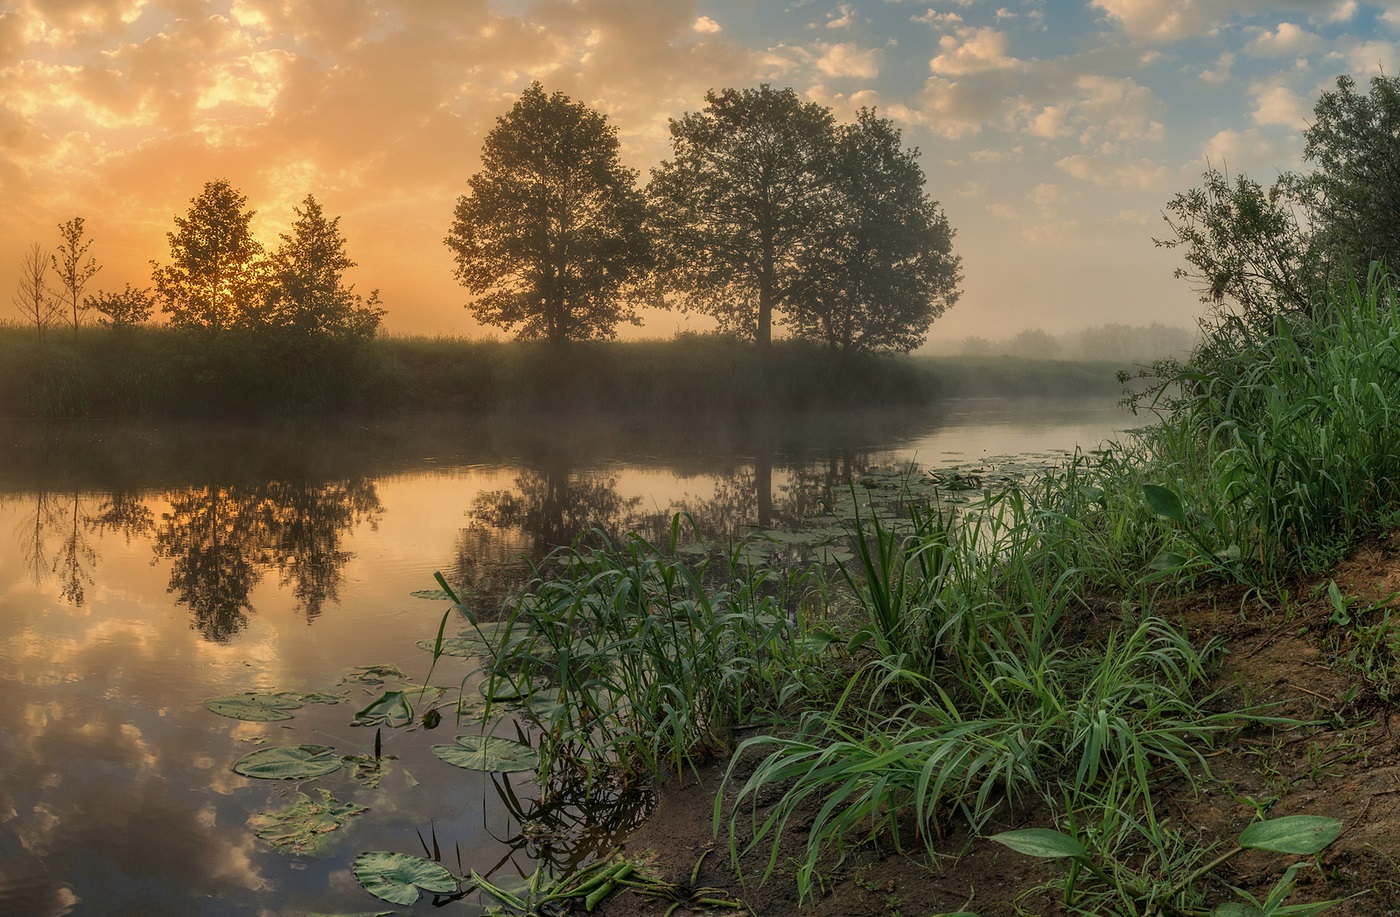 Morning landscape by the river